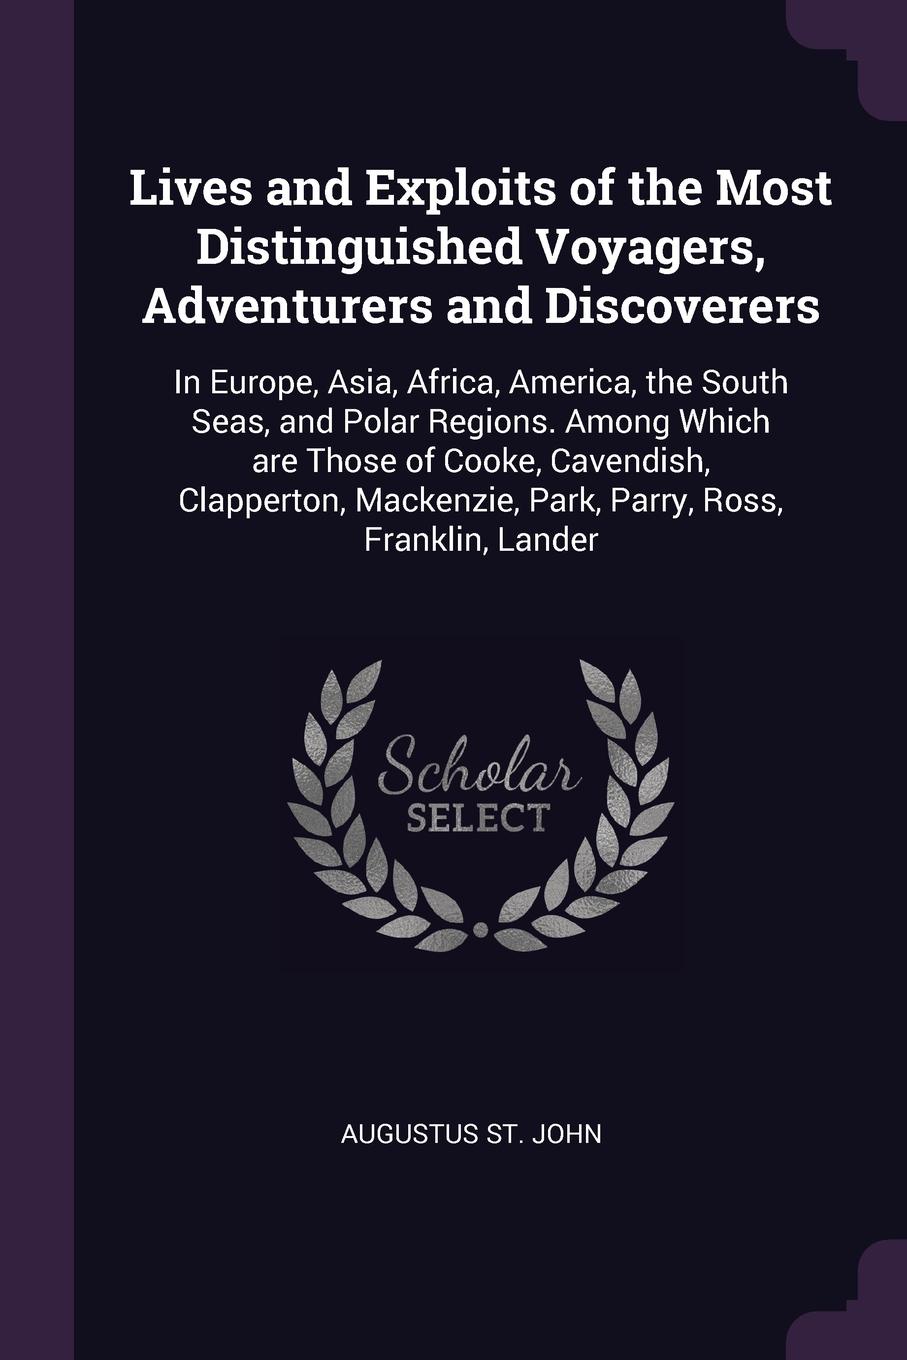 Lives and Exploits of the Most Distinguished Voyagers, Adventurers and Discoverers. In Europe, Asia, Africa, America, the South Seas, and Polar Regions. Among Which are Those of Cooke, Cavendish, Clapperton, Mackenzie, Park, Parry, Ross, Franklin,...